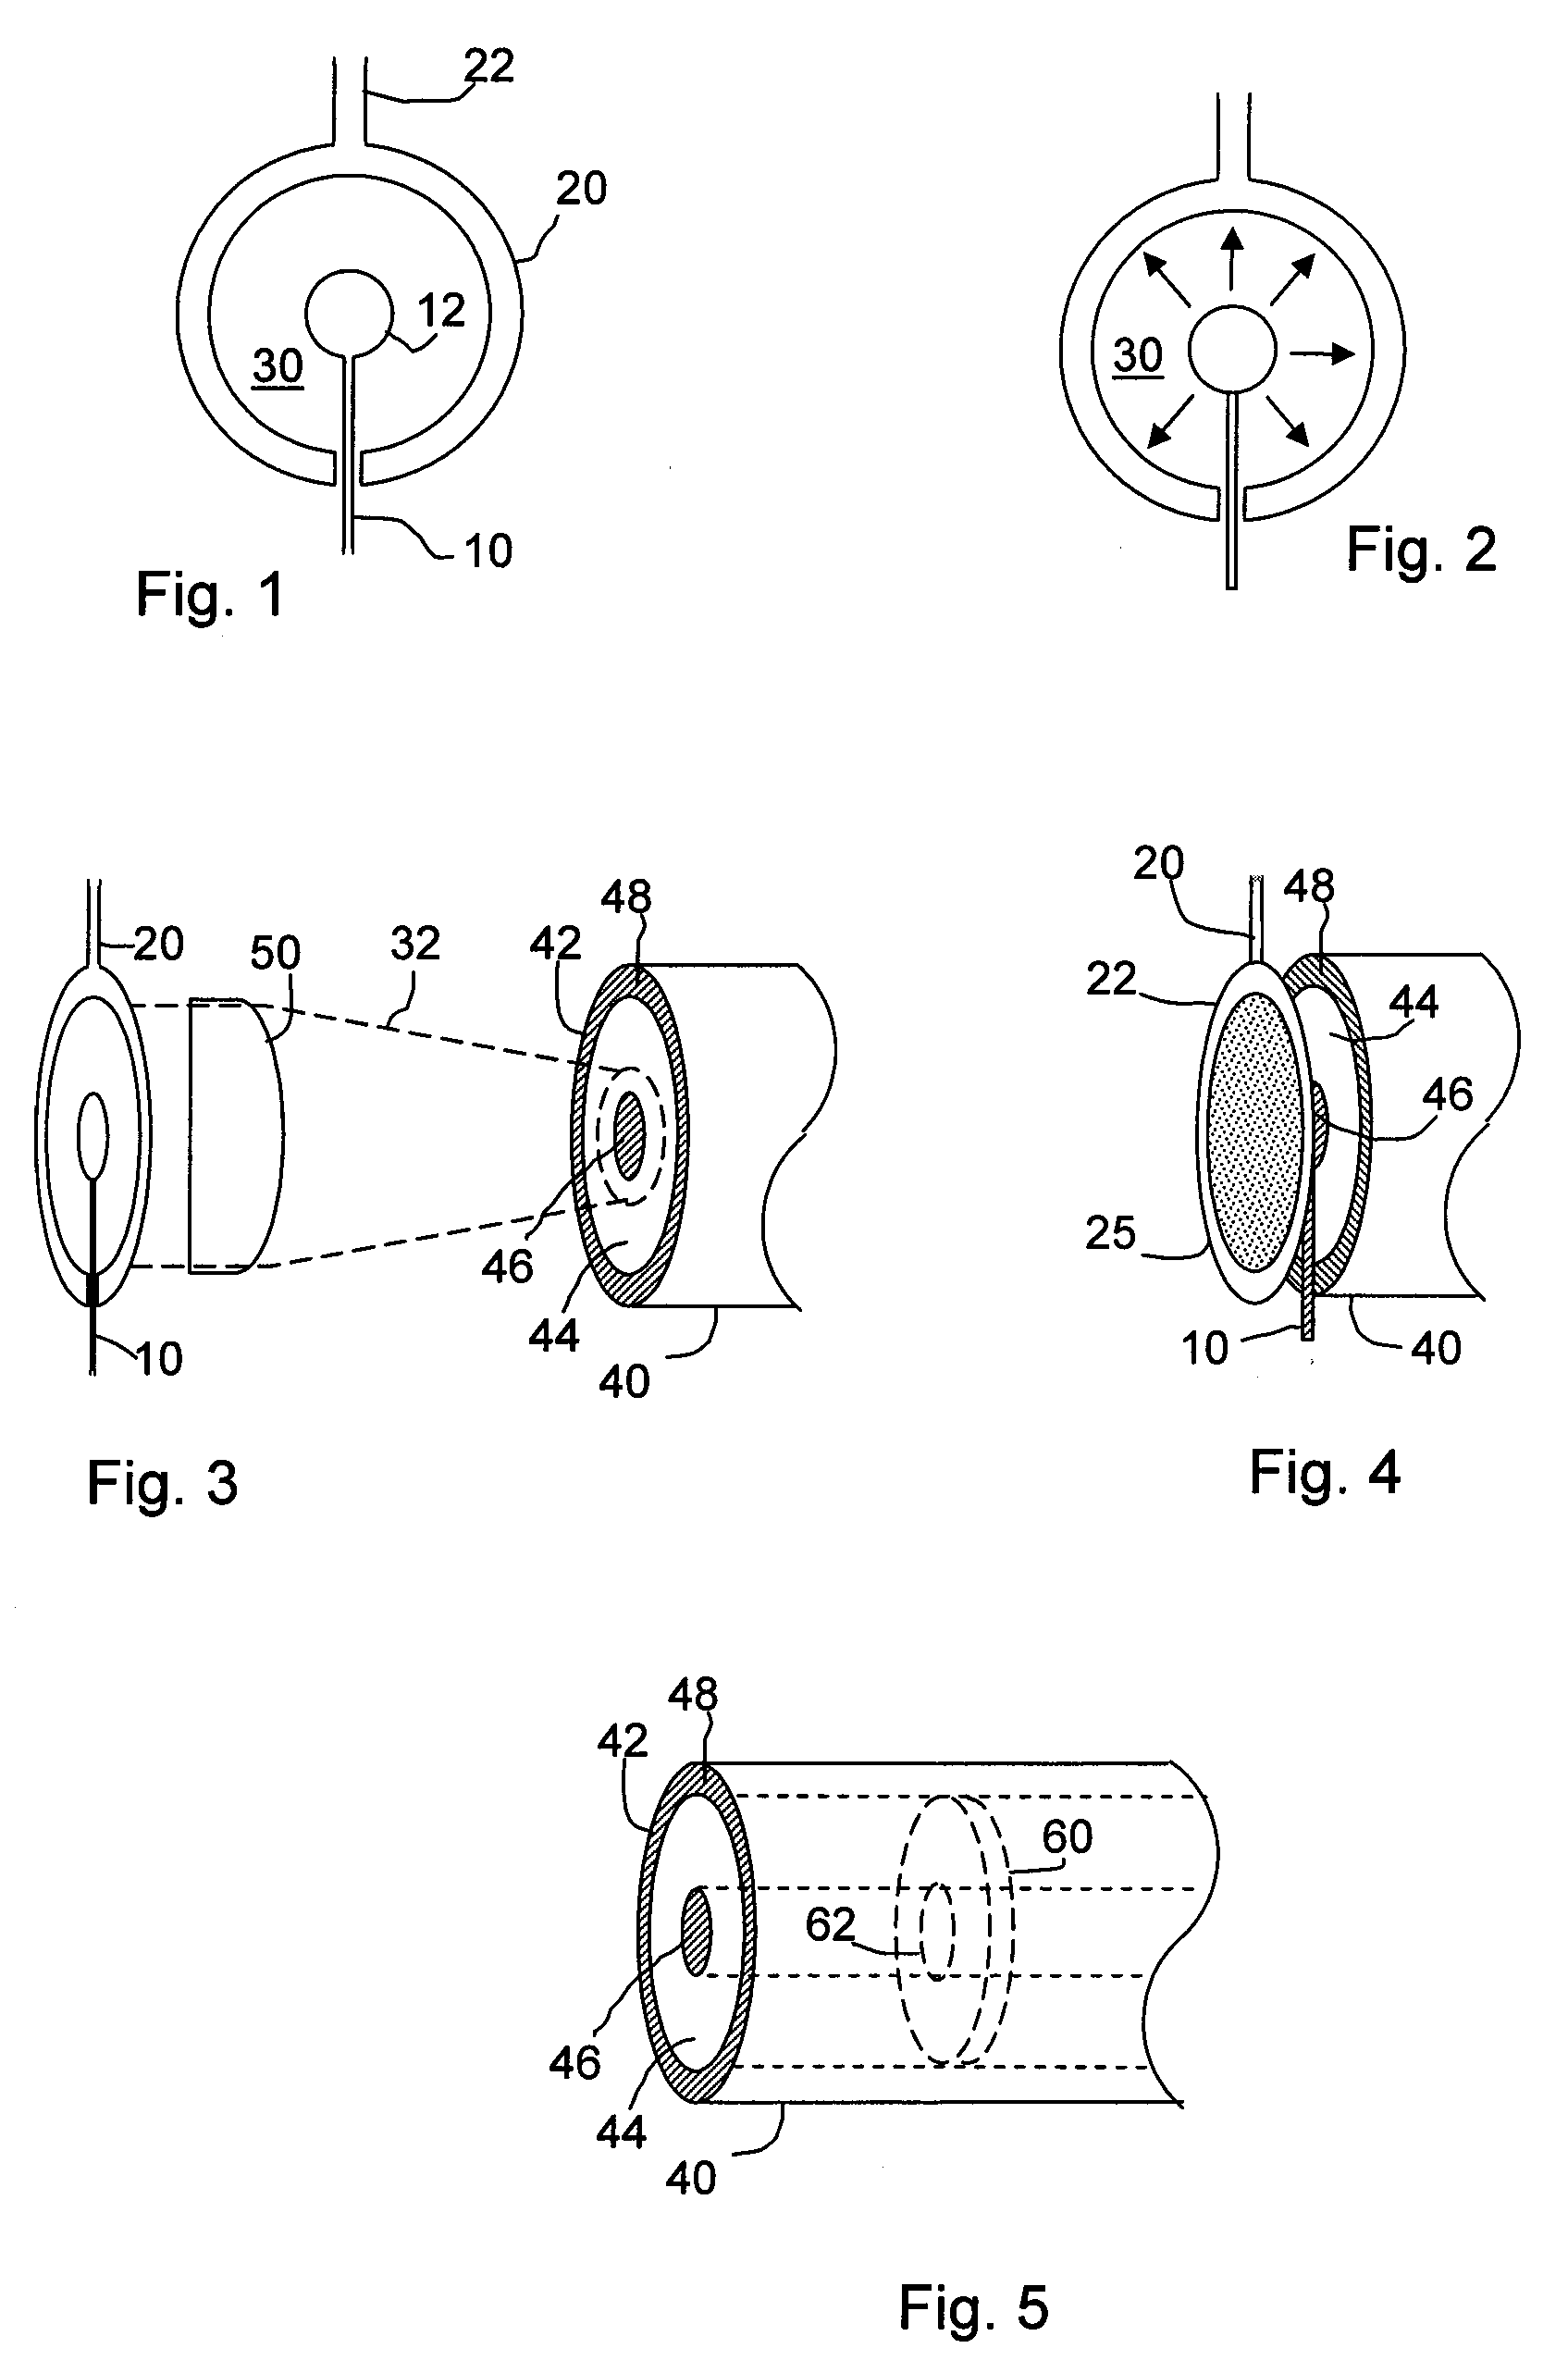 Method for coupling terahertz pulses into a coaxial waveguide